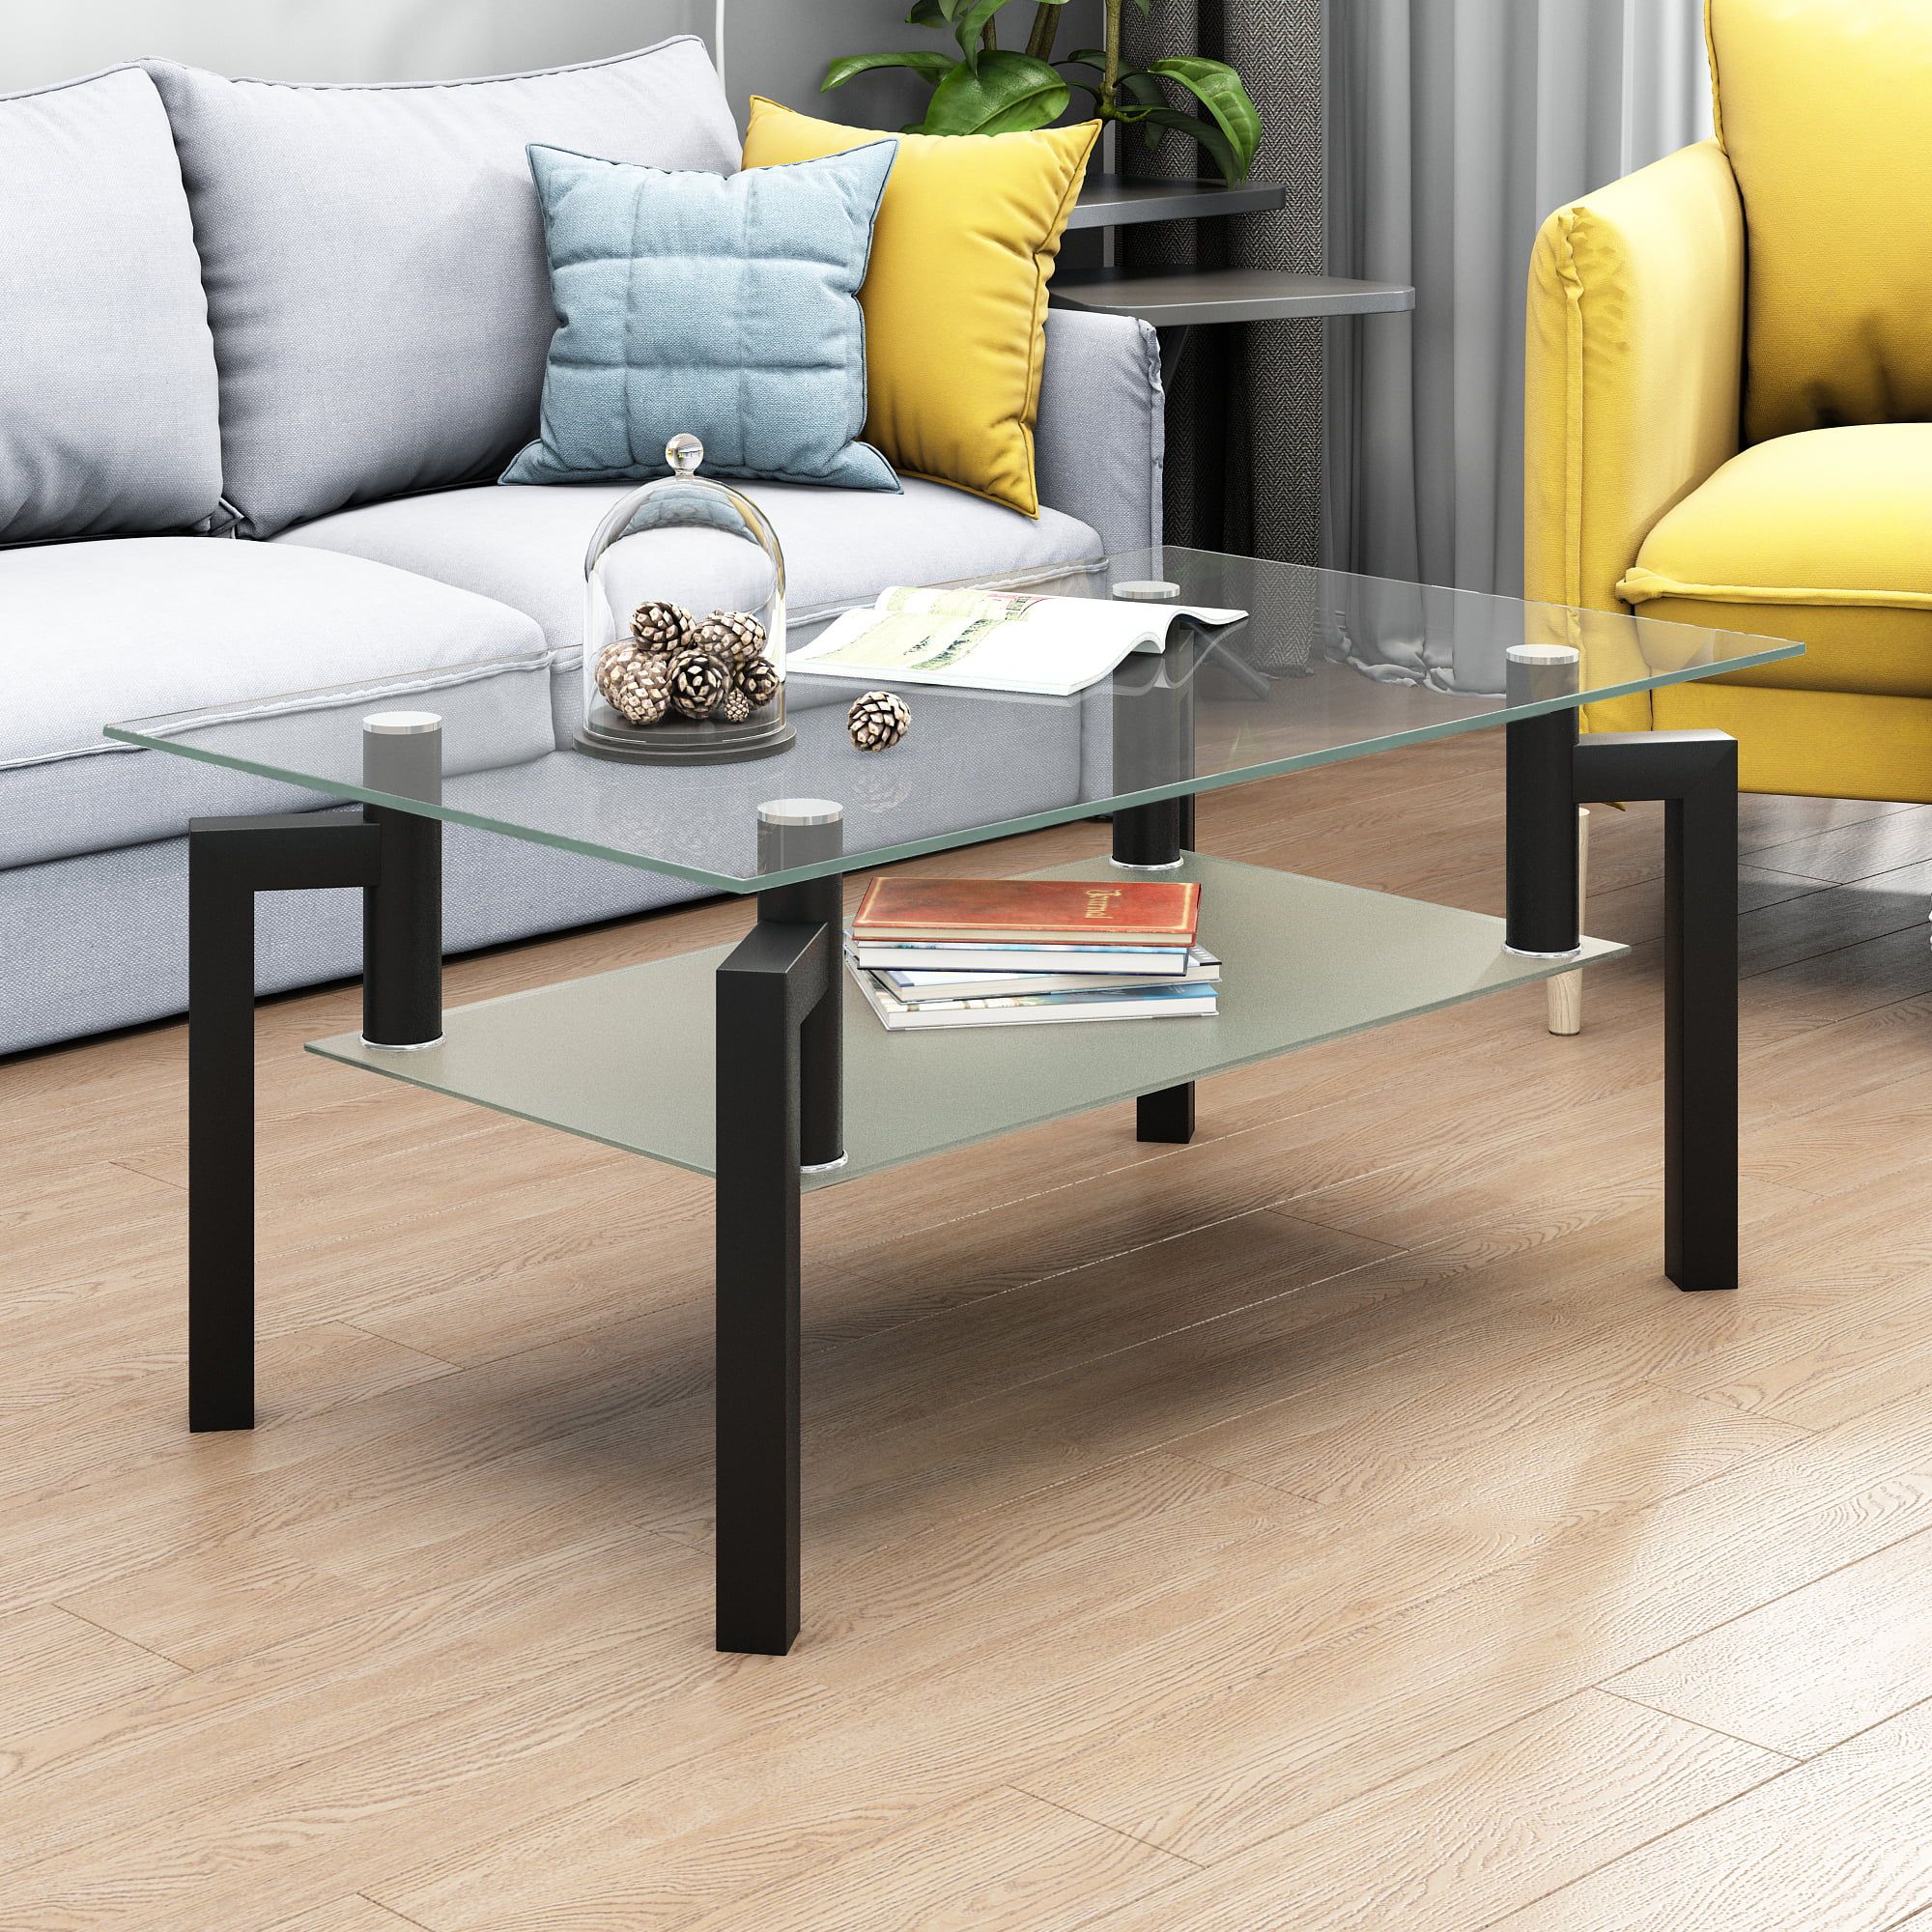 2 Tier Glass Coffee Table, Rectangle Open Shelf Coffee Accent Table, Living  Room Table With Glass Shelf, Large Storage Space Cocktail Table, Center  Table With Wooden Legs For Home Office, B1258 – Walmart Pertaining To Glass Open Shelf Coffee Tables (View 4 of 15)